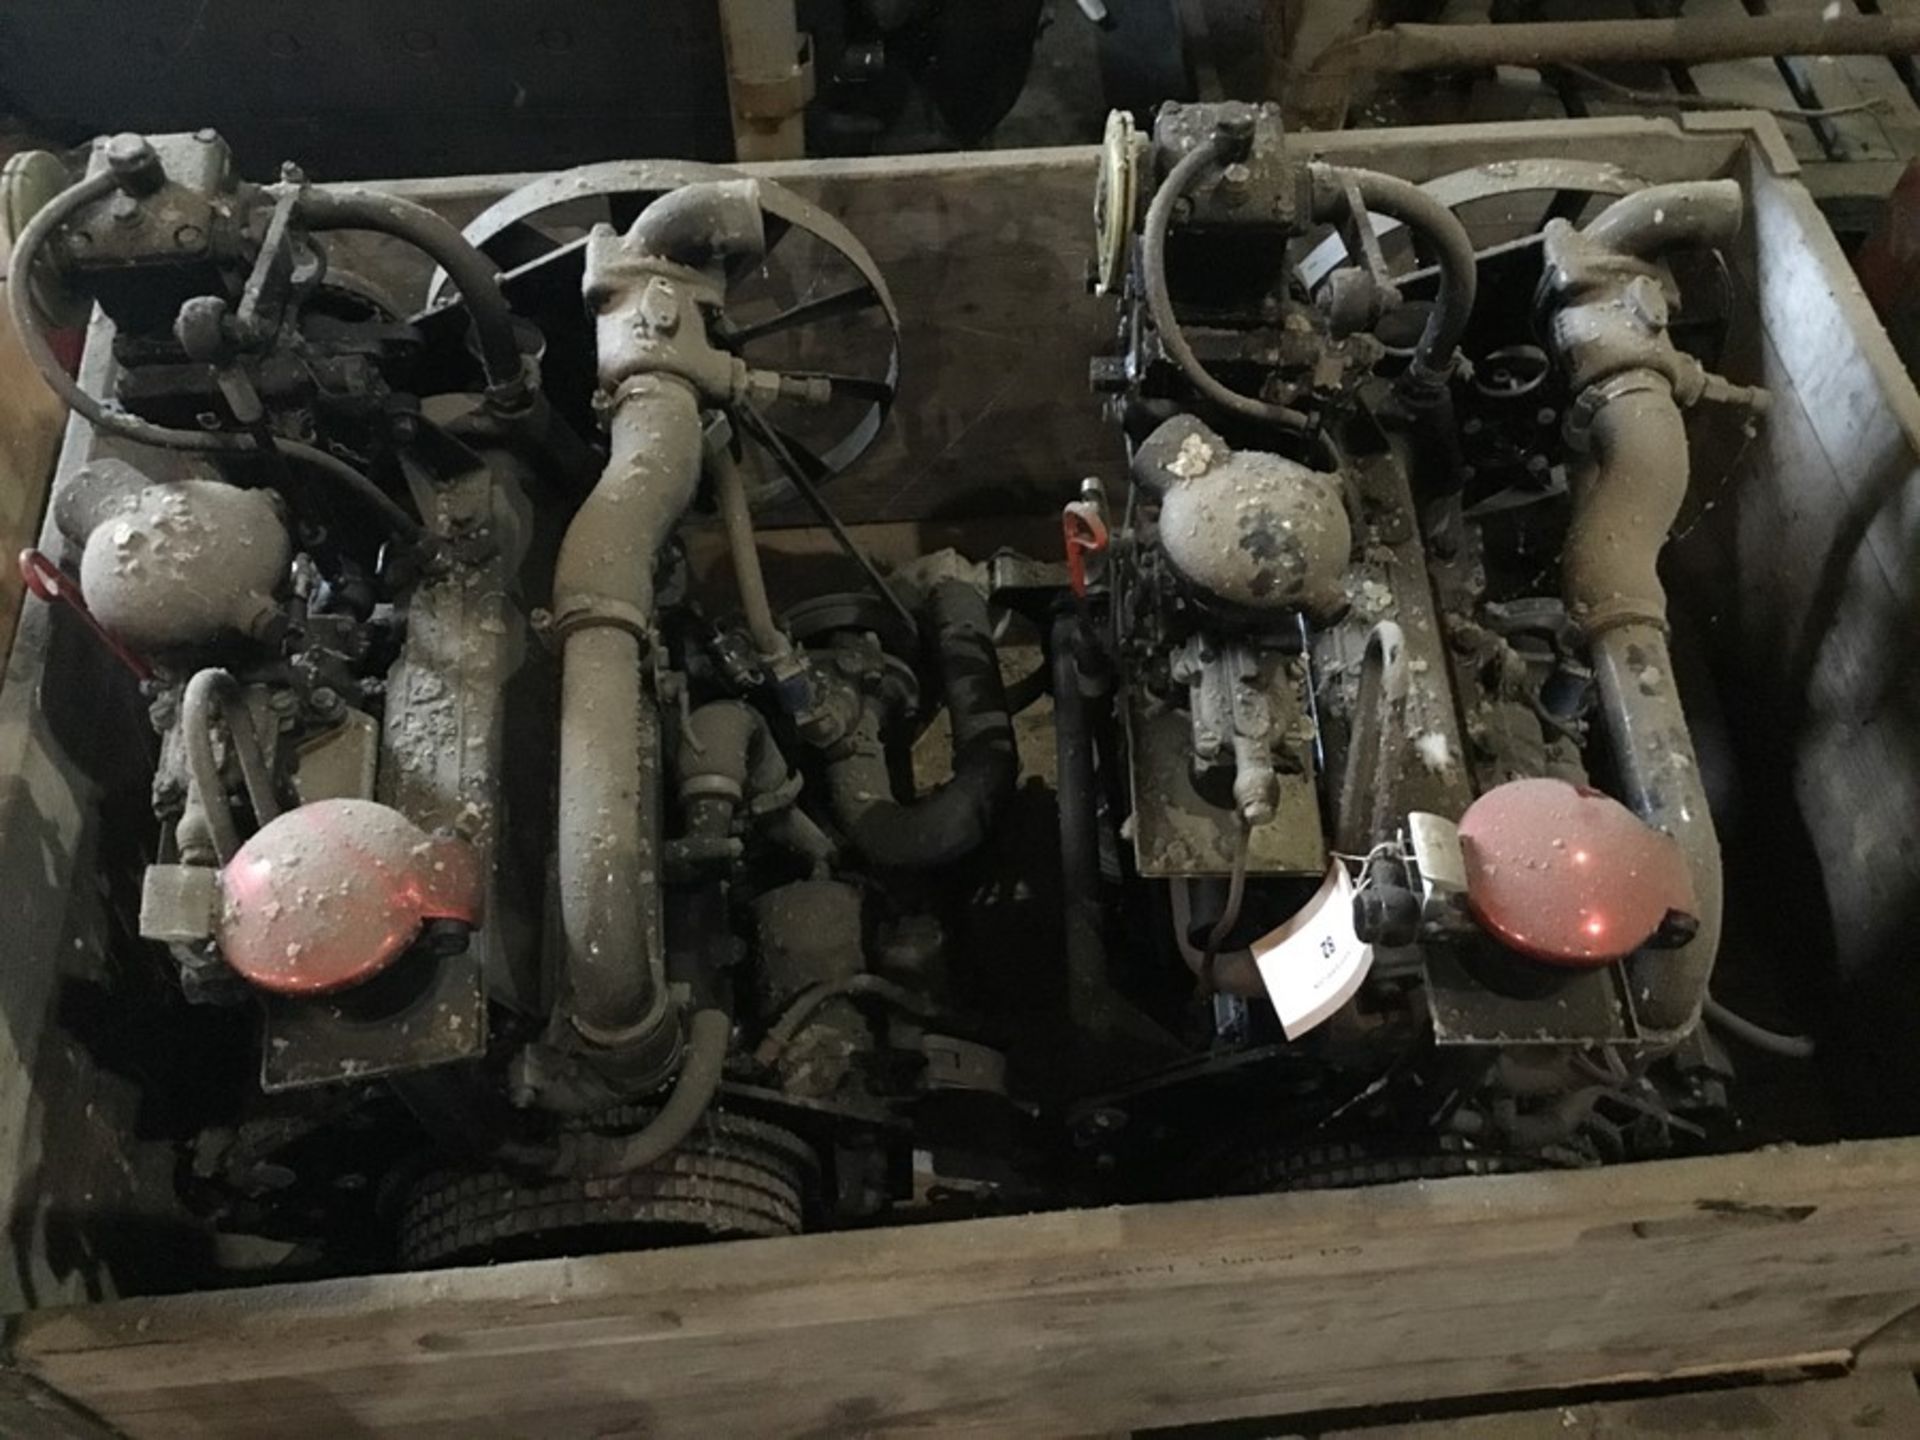 Pair of Coventry FWMB509 Petrol Engine: Coventry FWMB509 4cyl non turbo Incomplete - Image 6 of 6